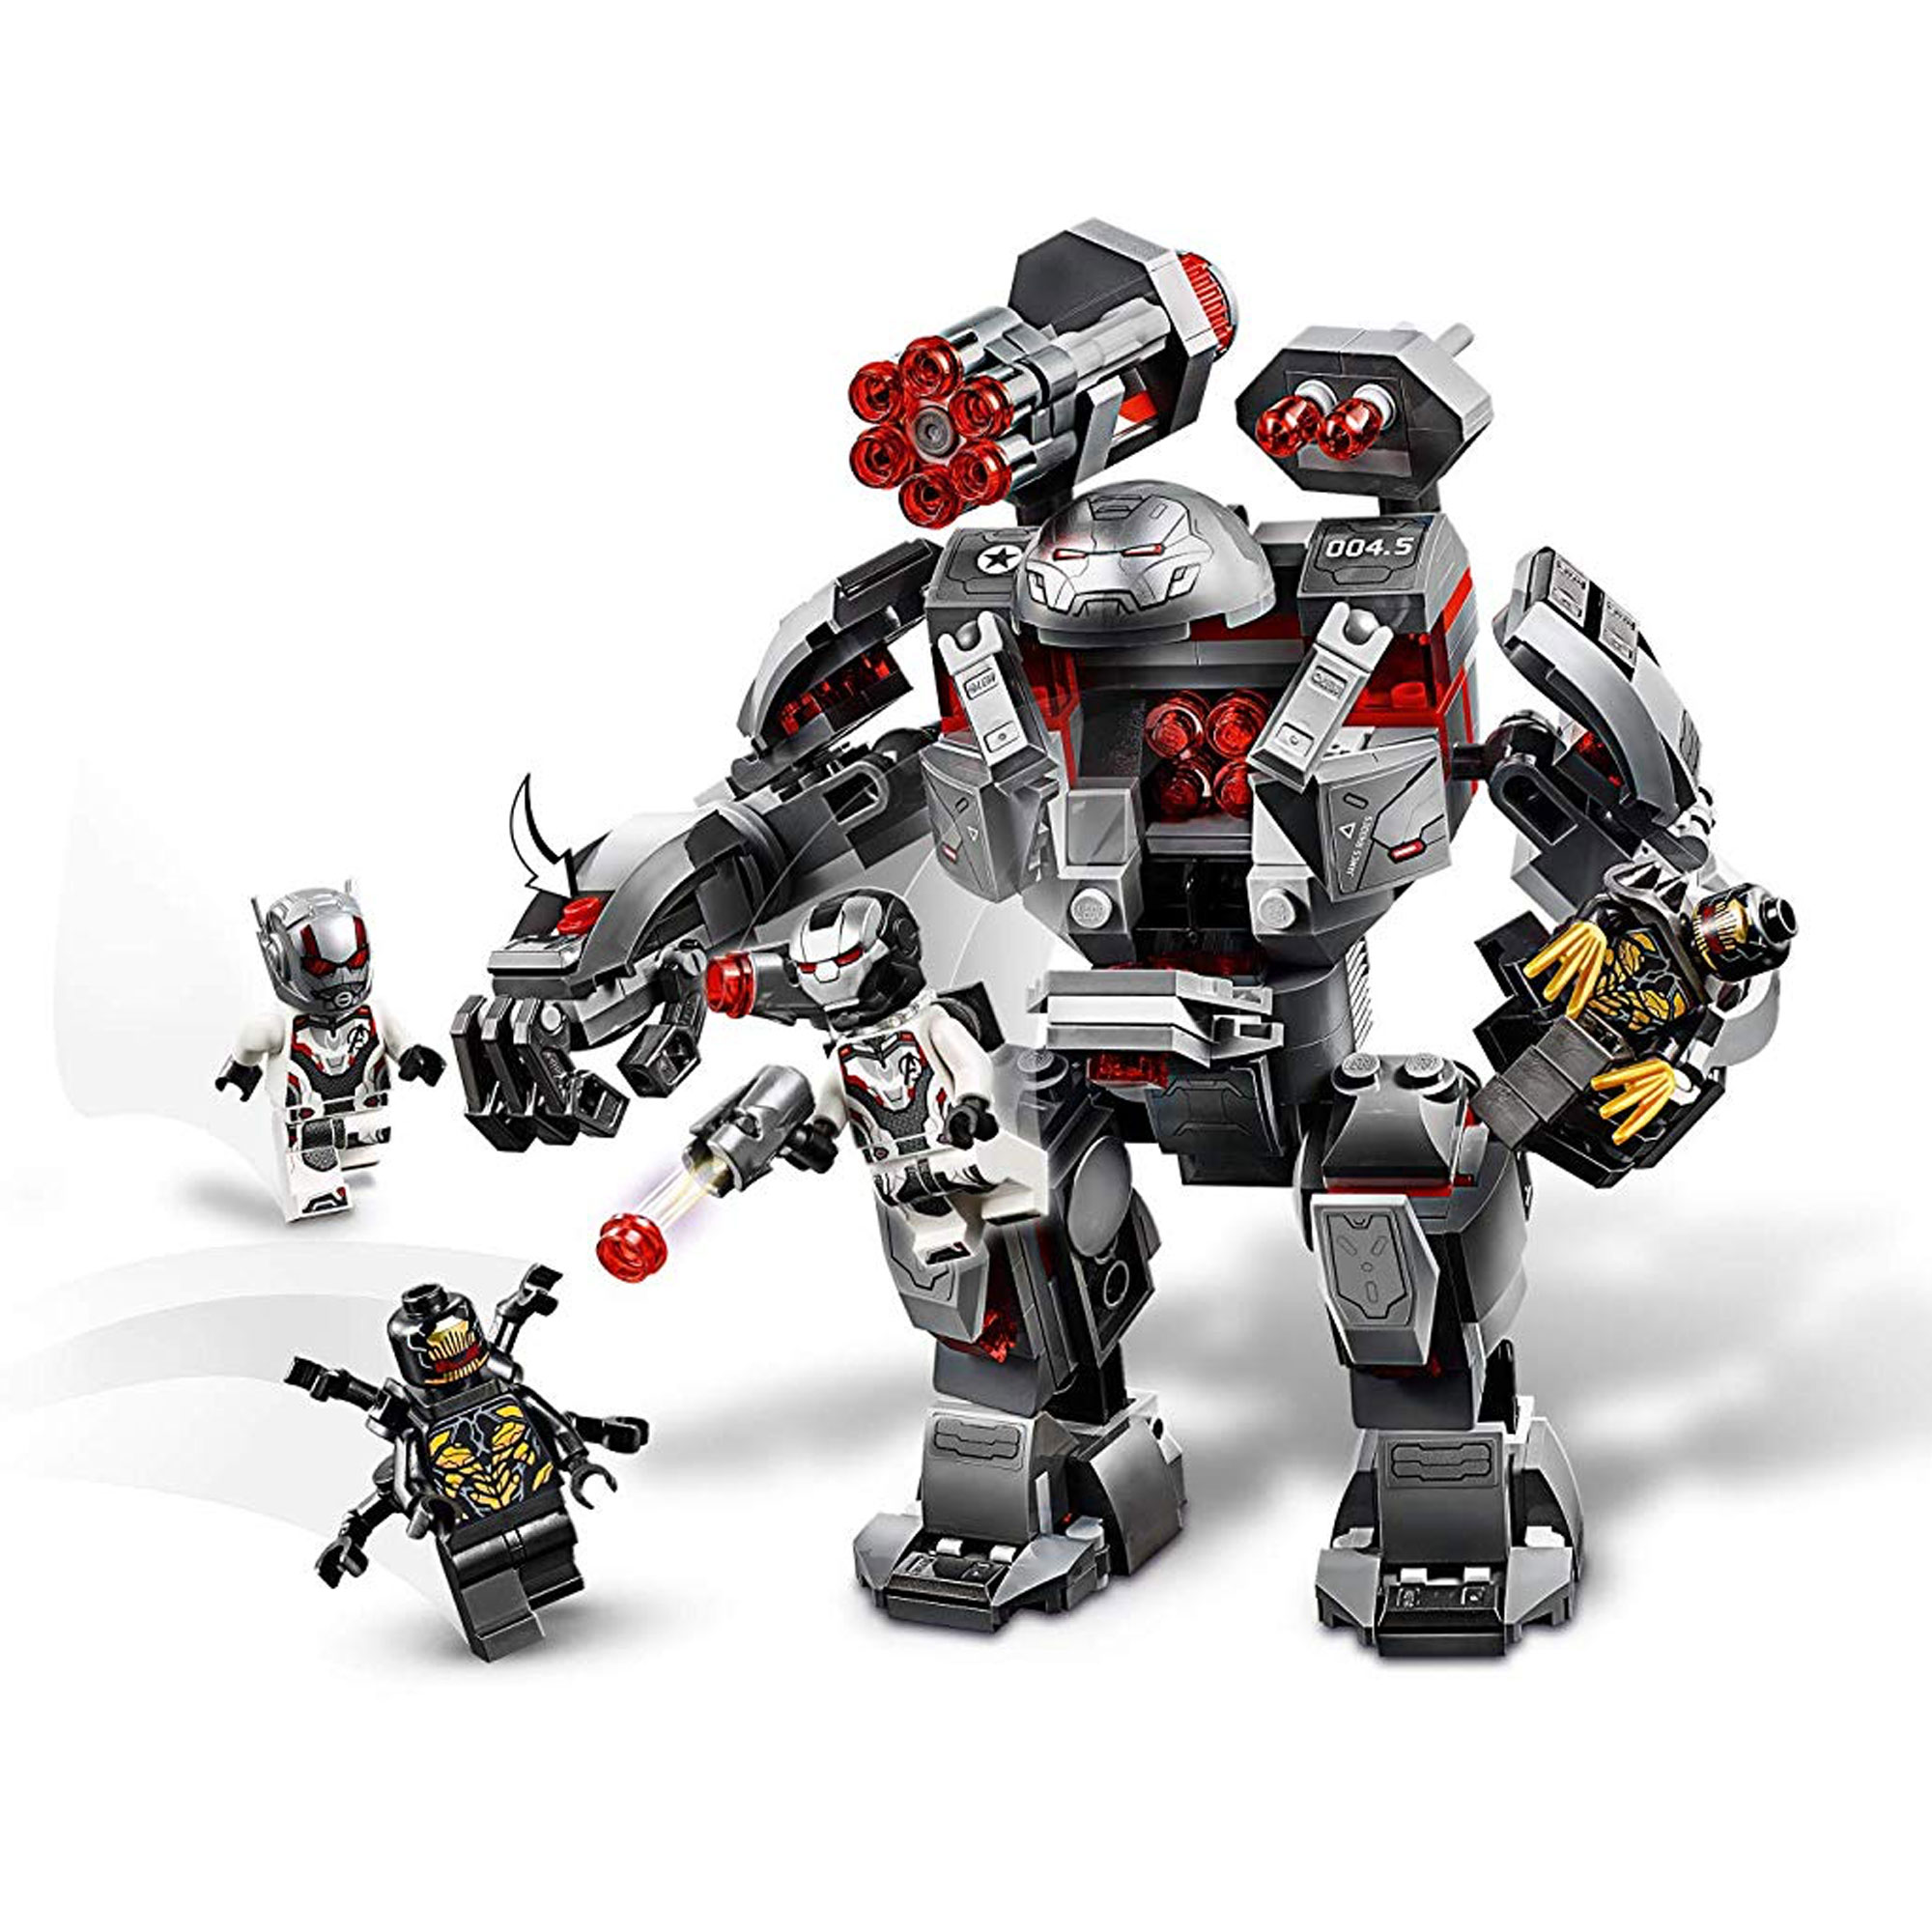 LEGO Marvel Avengers War Machine Buster 76124 Building Kit (362 Pieces) - image 5 of 8